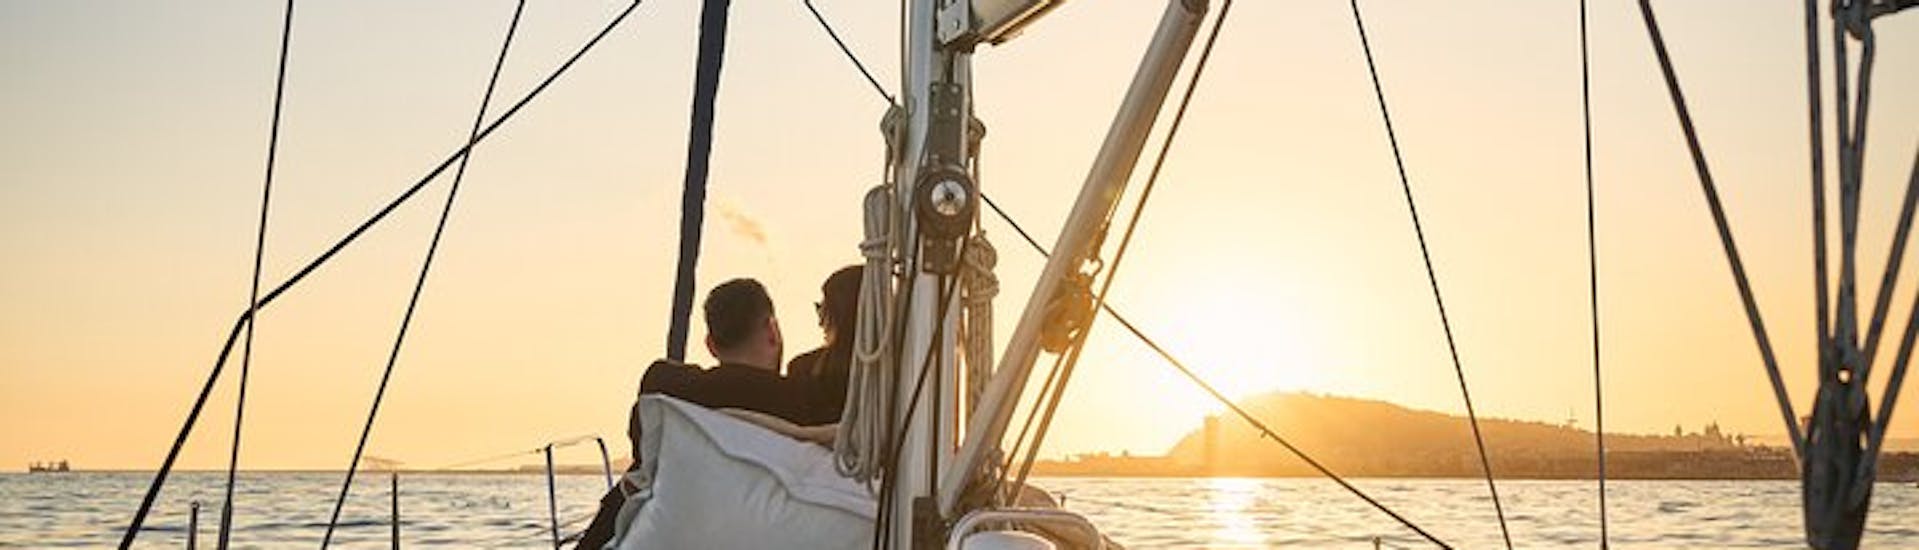 Private Sunset Sailboat Trip in Barcelona with Drinks & Snacks.